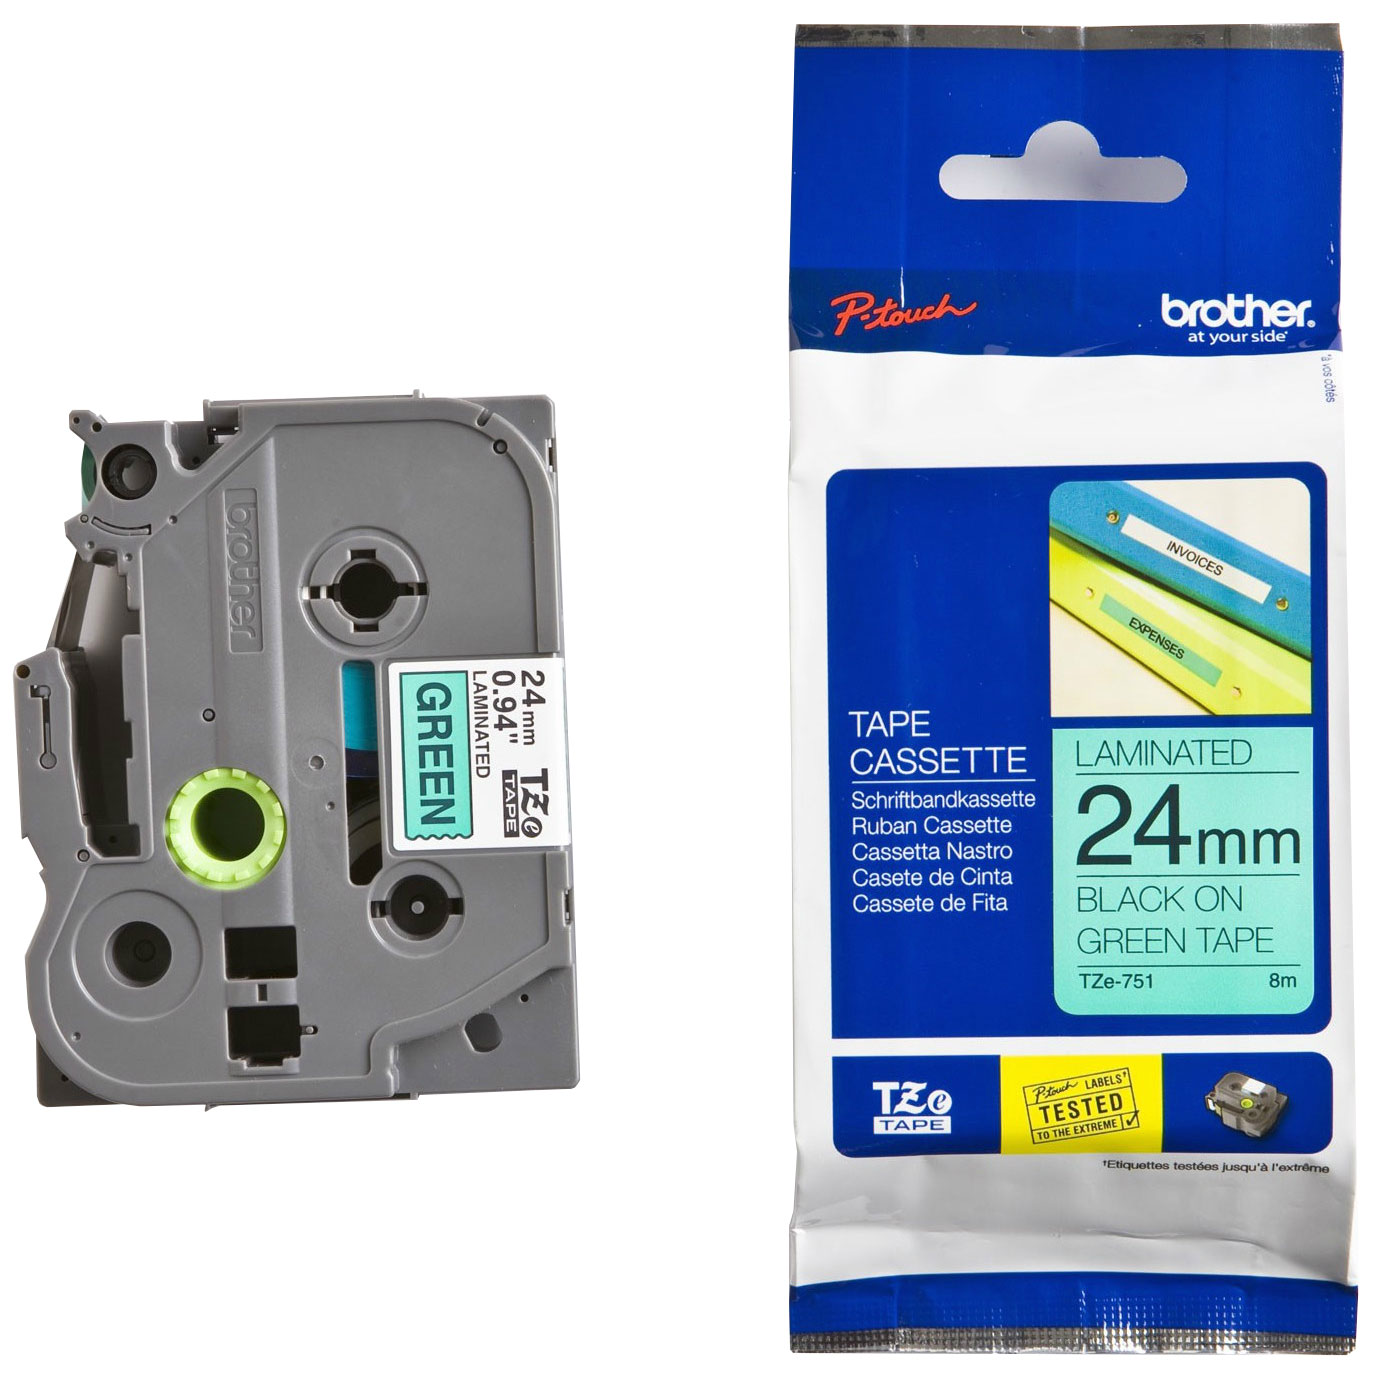 Original Brother TZe-751 Black On Green 24mm x 8m Laminated P-Touch Label Tape (TZE751)